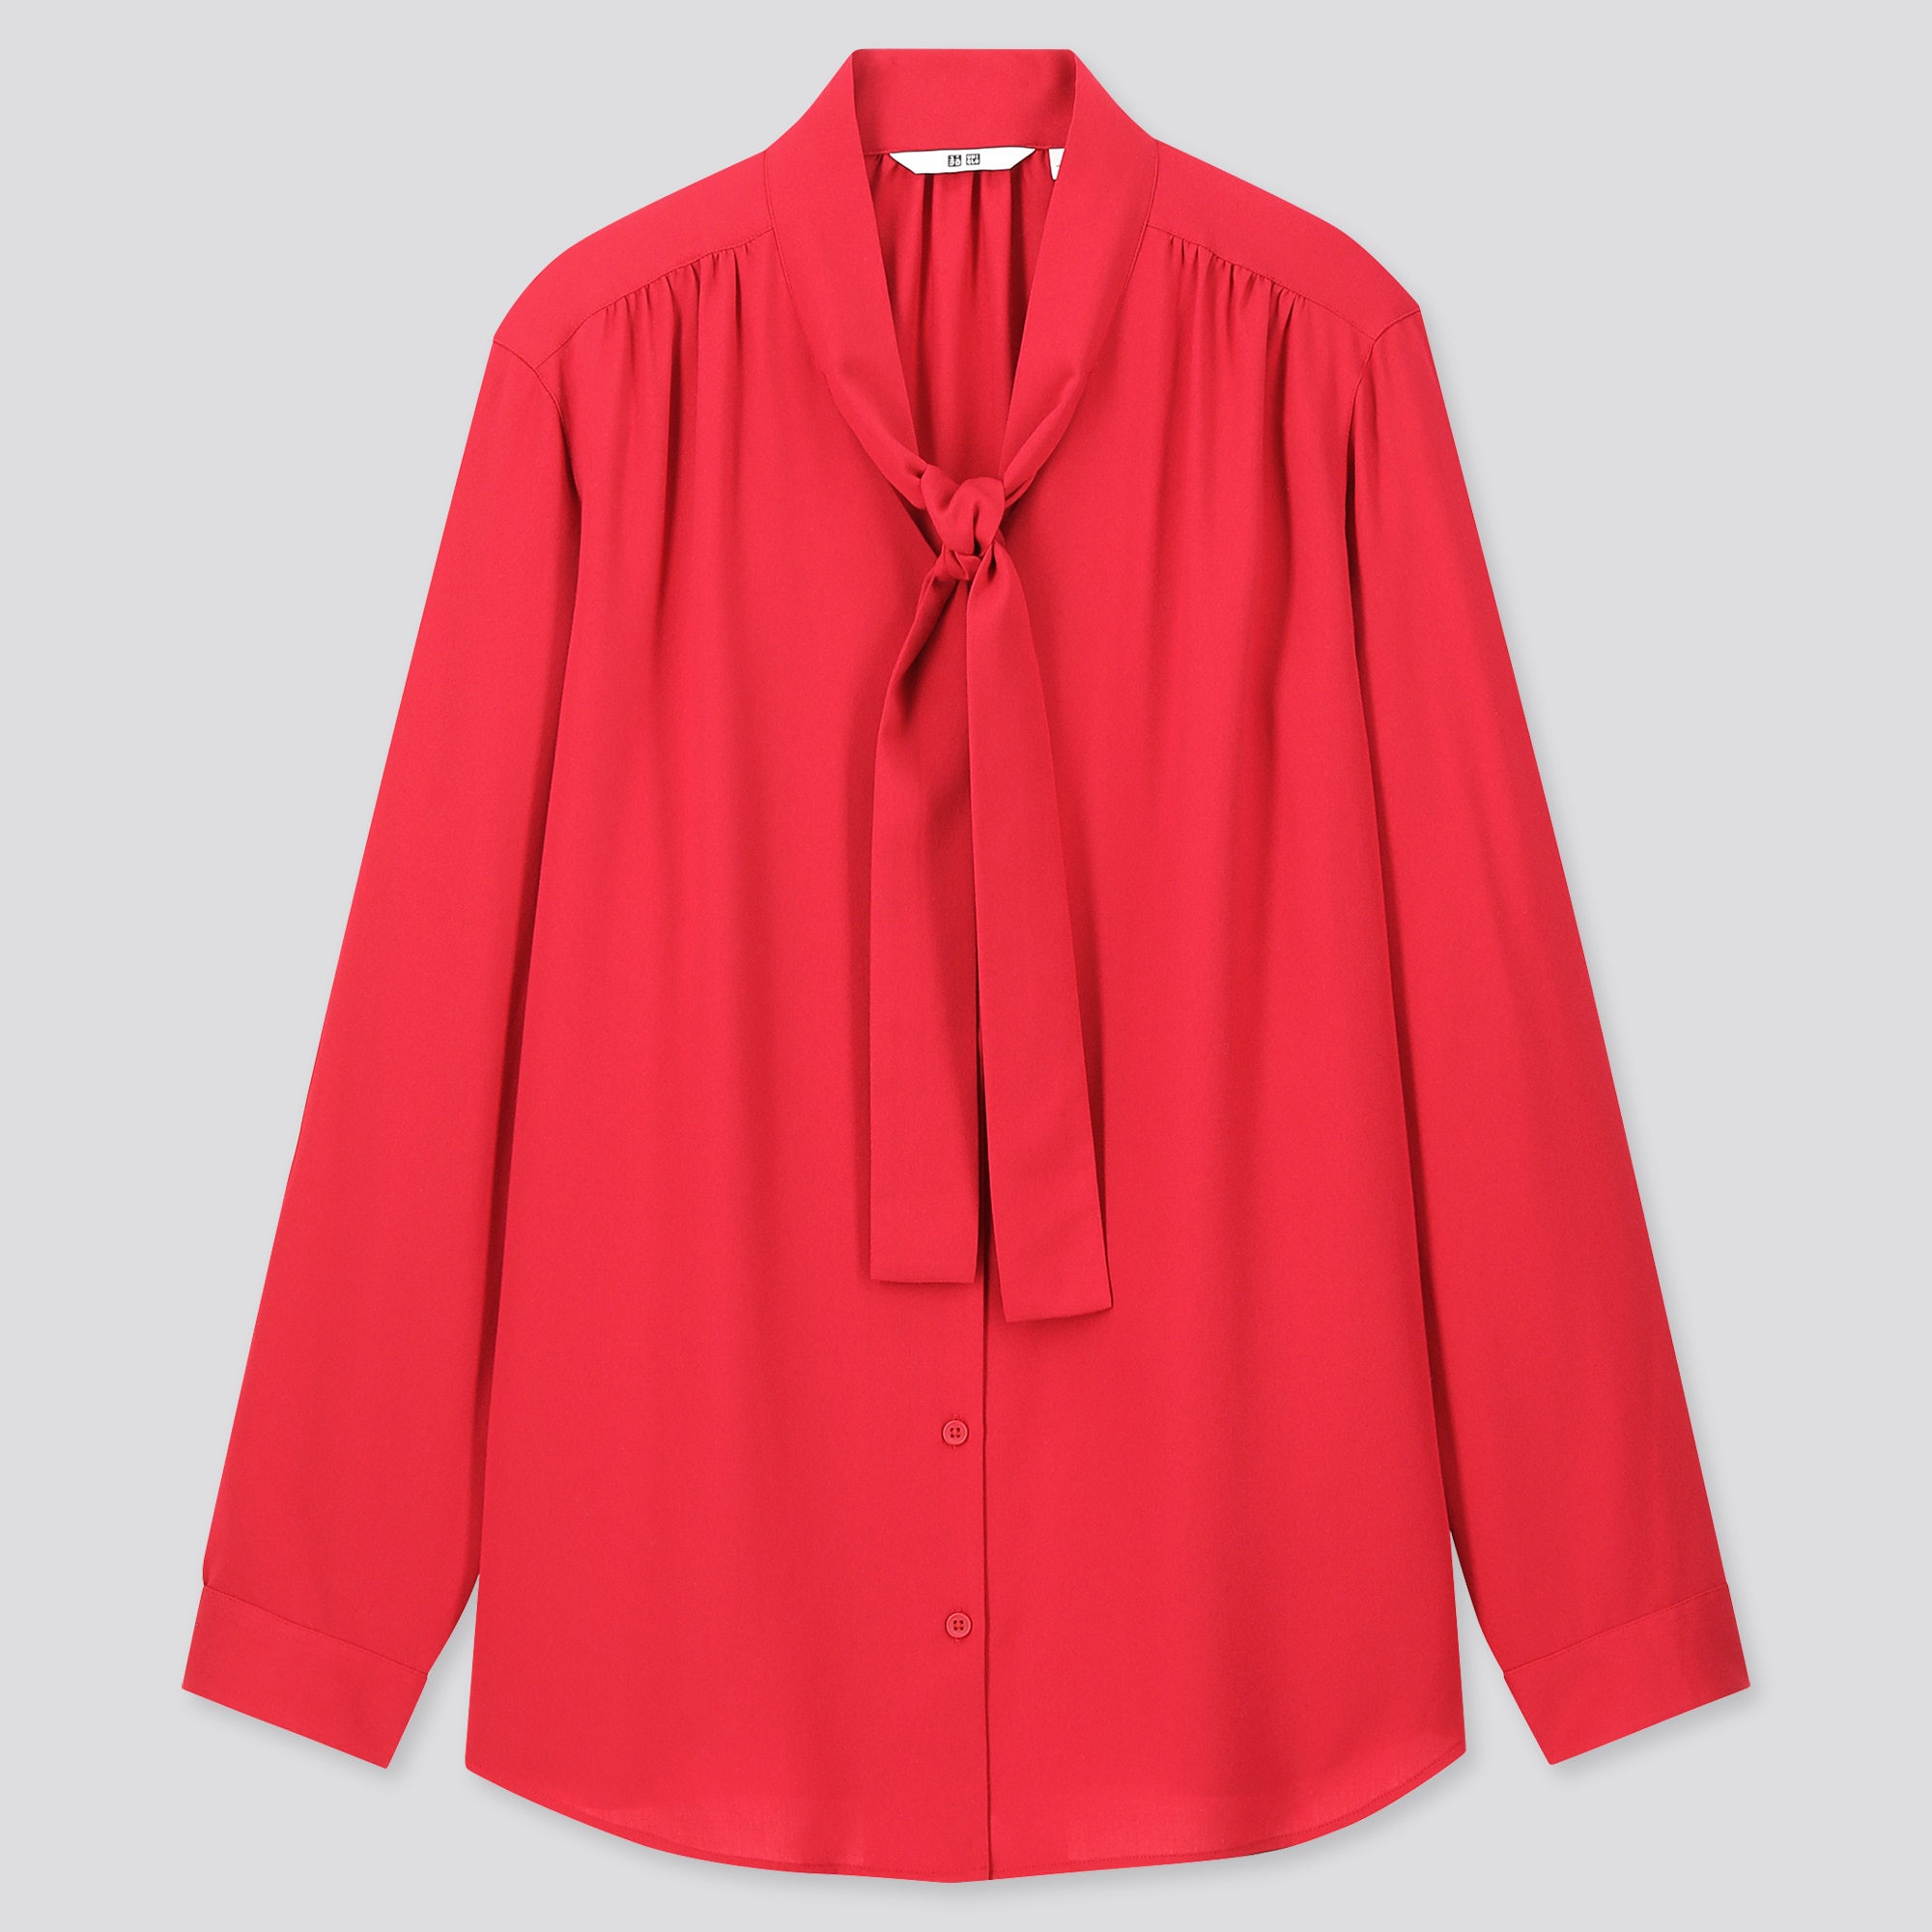 WOMEN RAYON BOW TIE LONG-SLEEVE BLOUSE | UNIQLO US